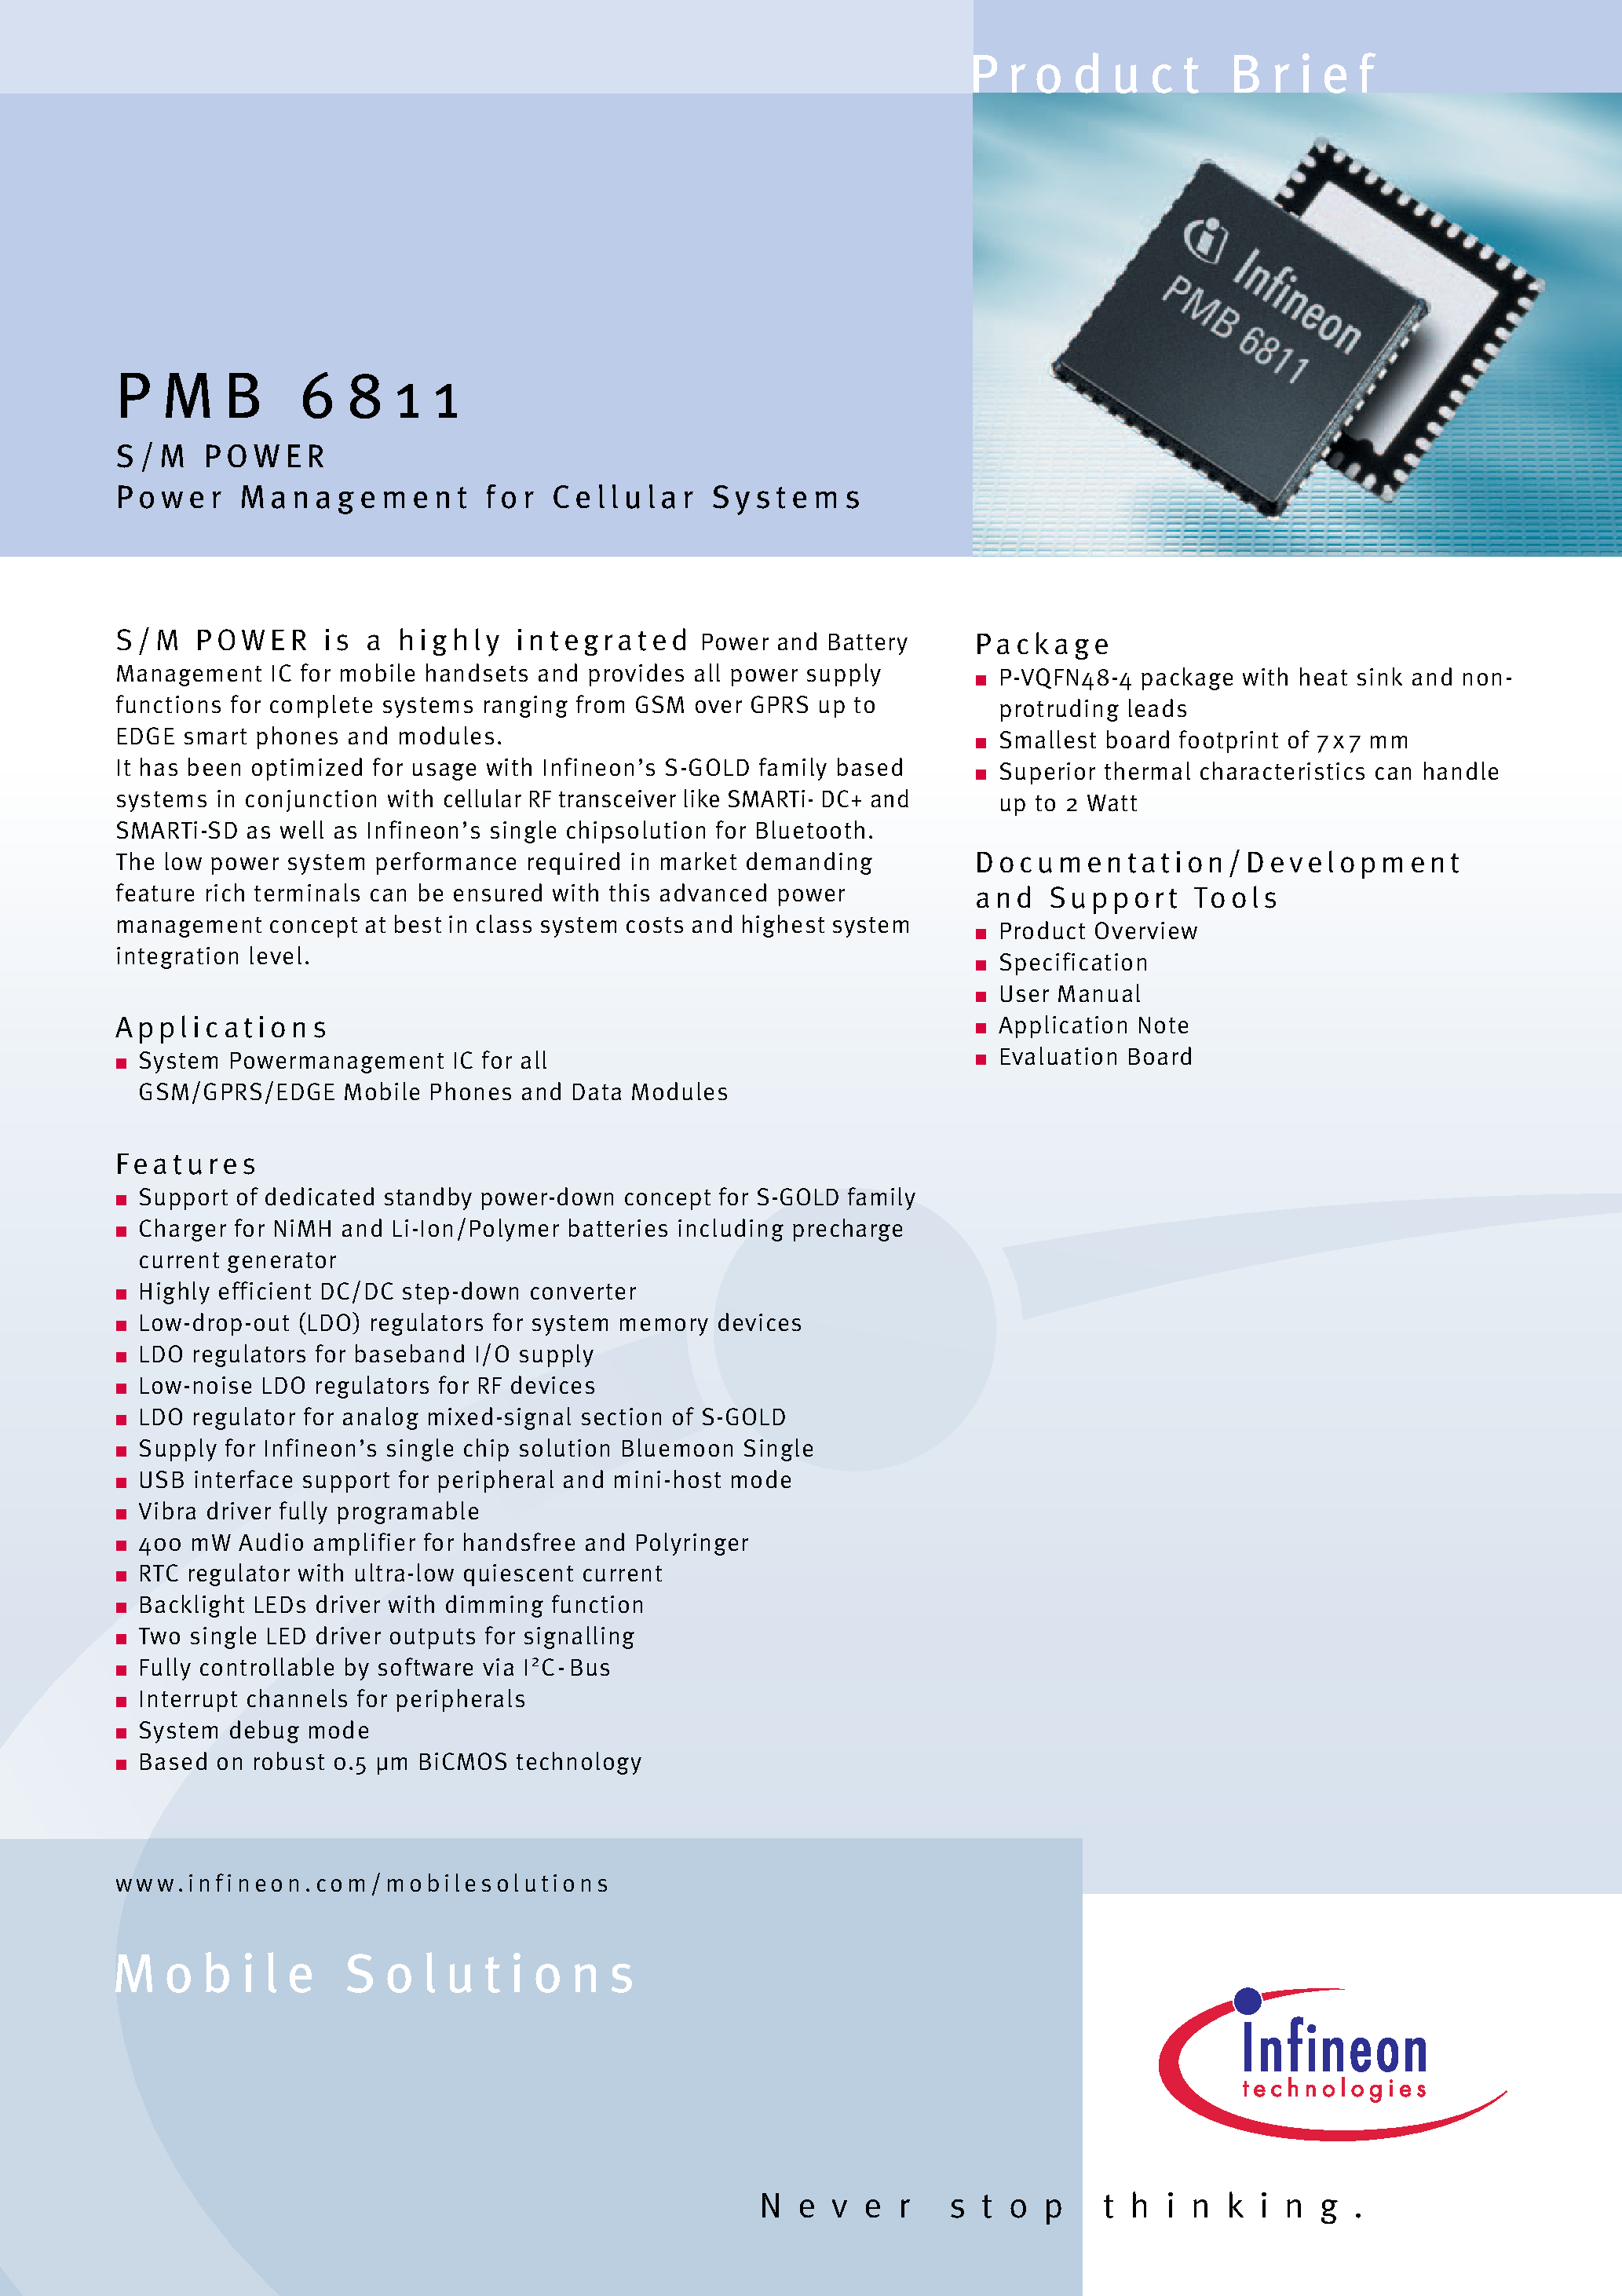 Datasheet PMB6811 - S/M POWER Power Managem e n t for Cel l u l a r Systems page 1